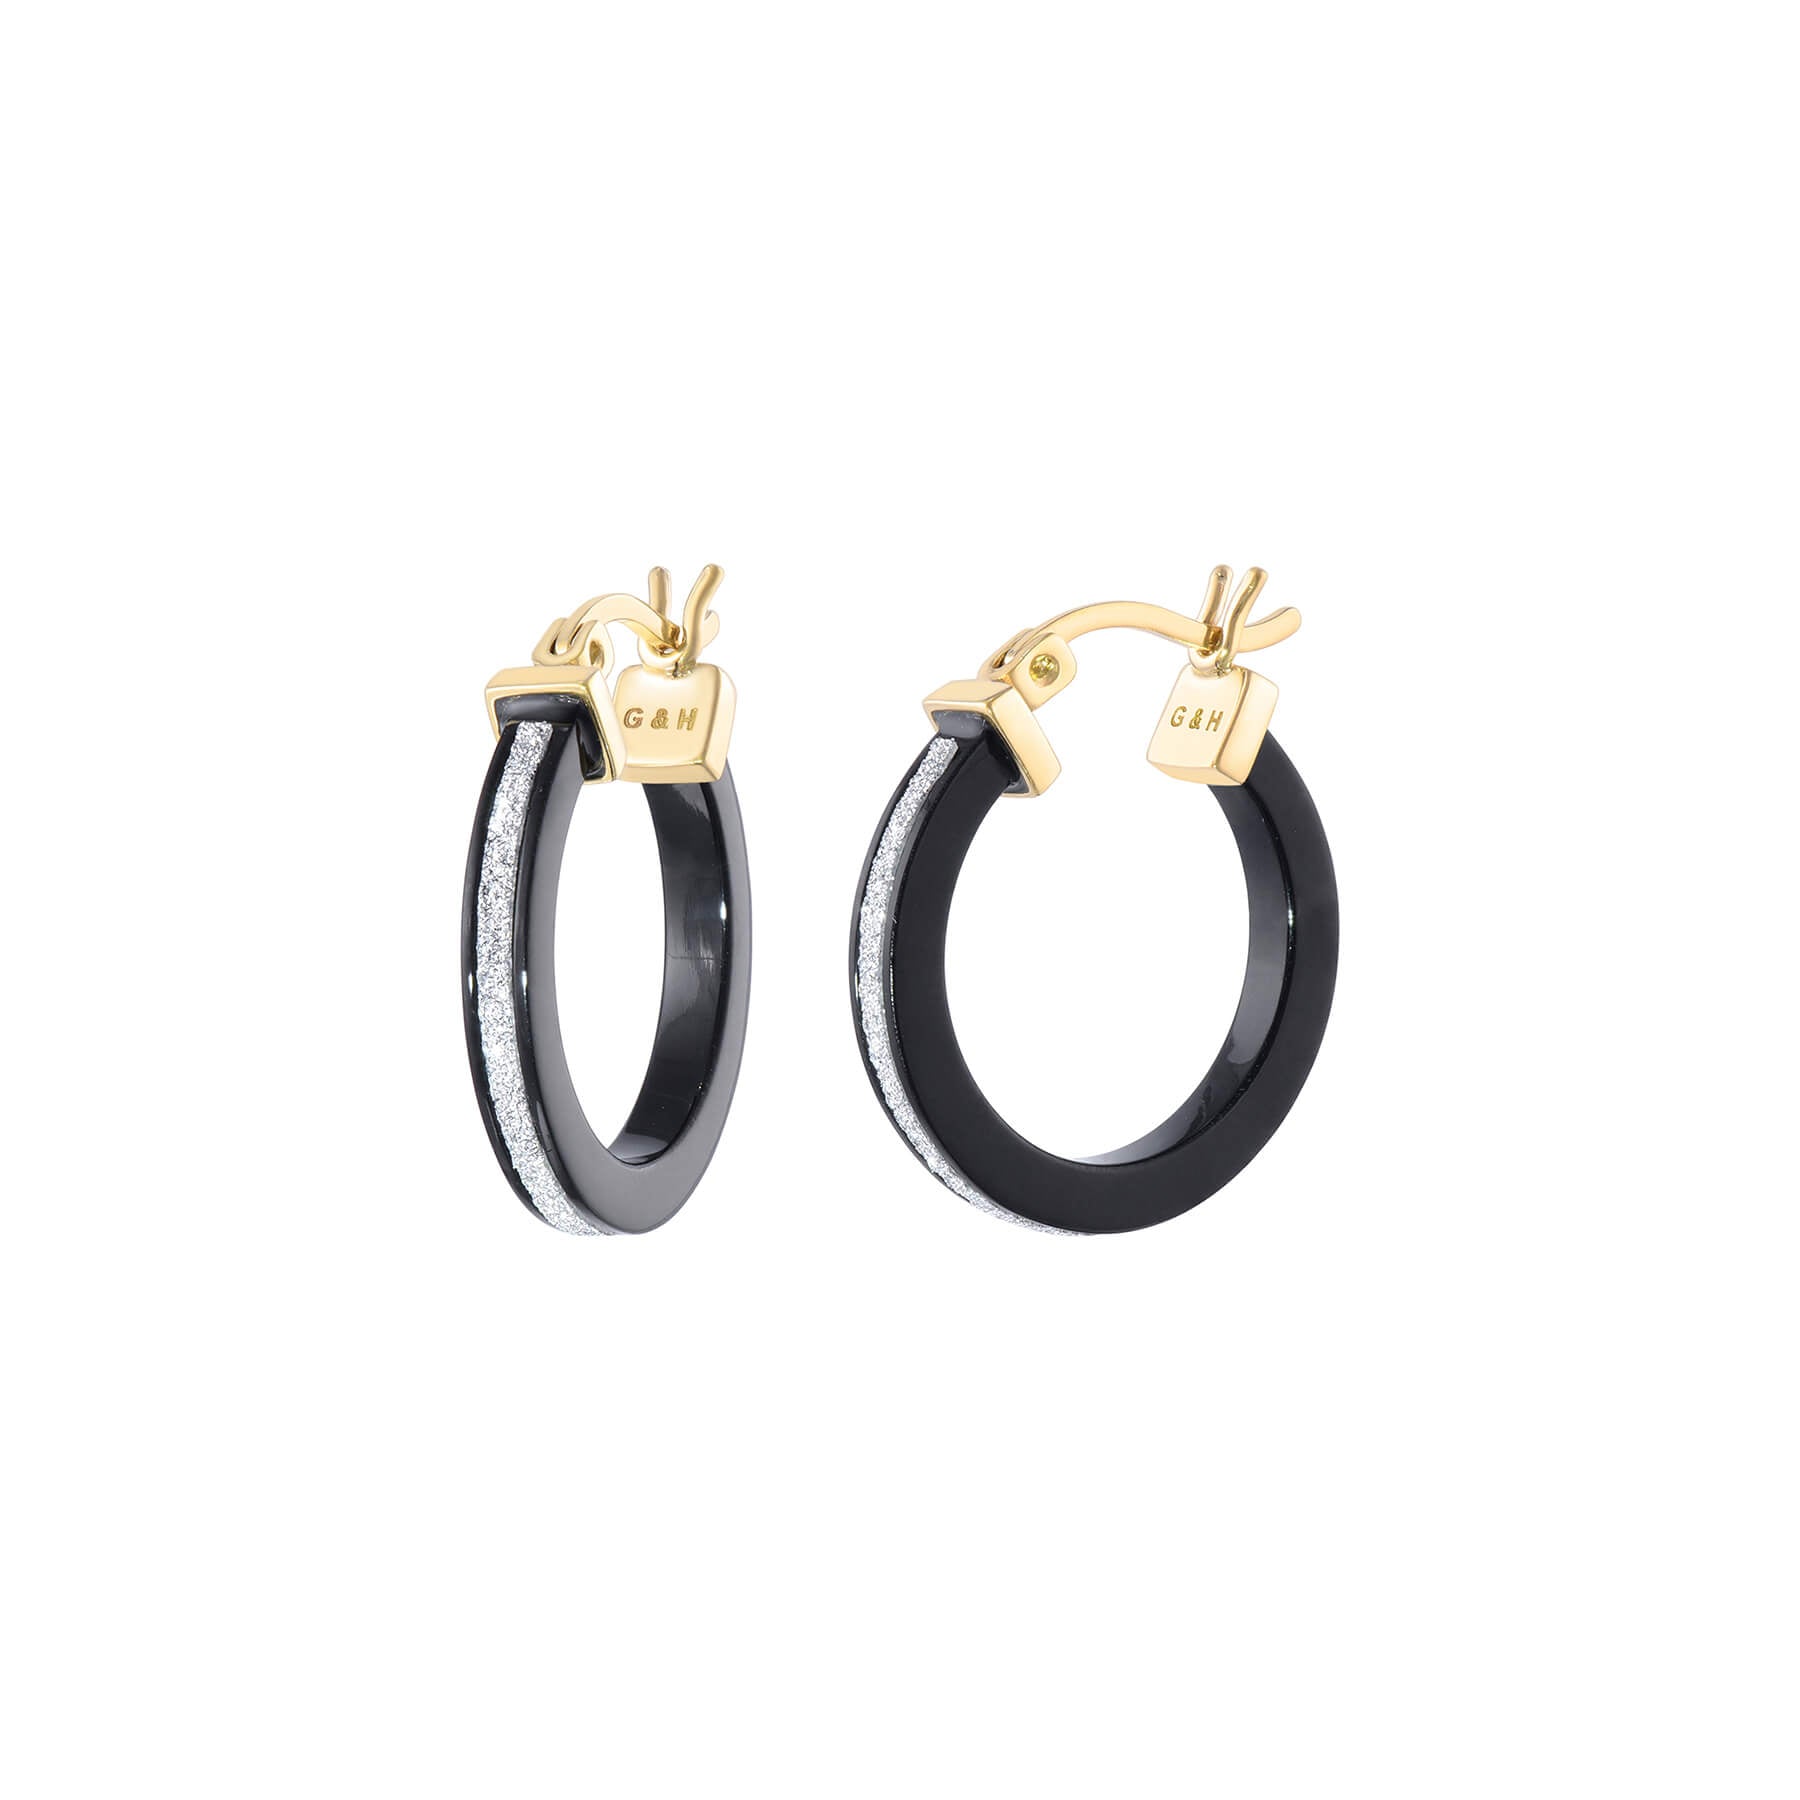 Thin Glitter Hoops - Black and Silver